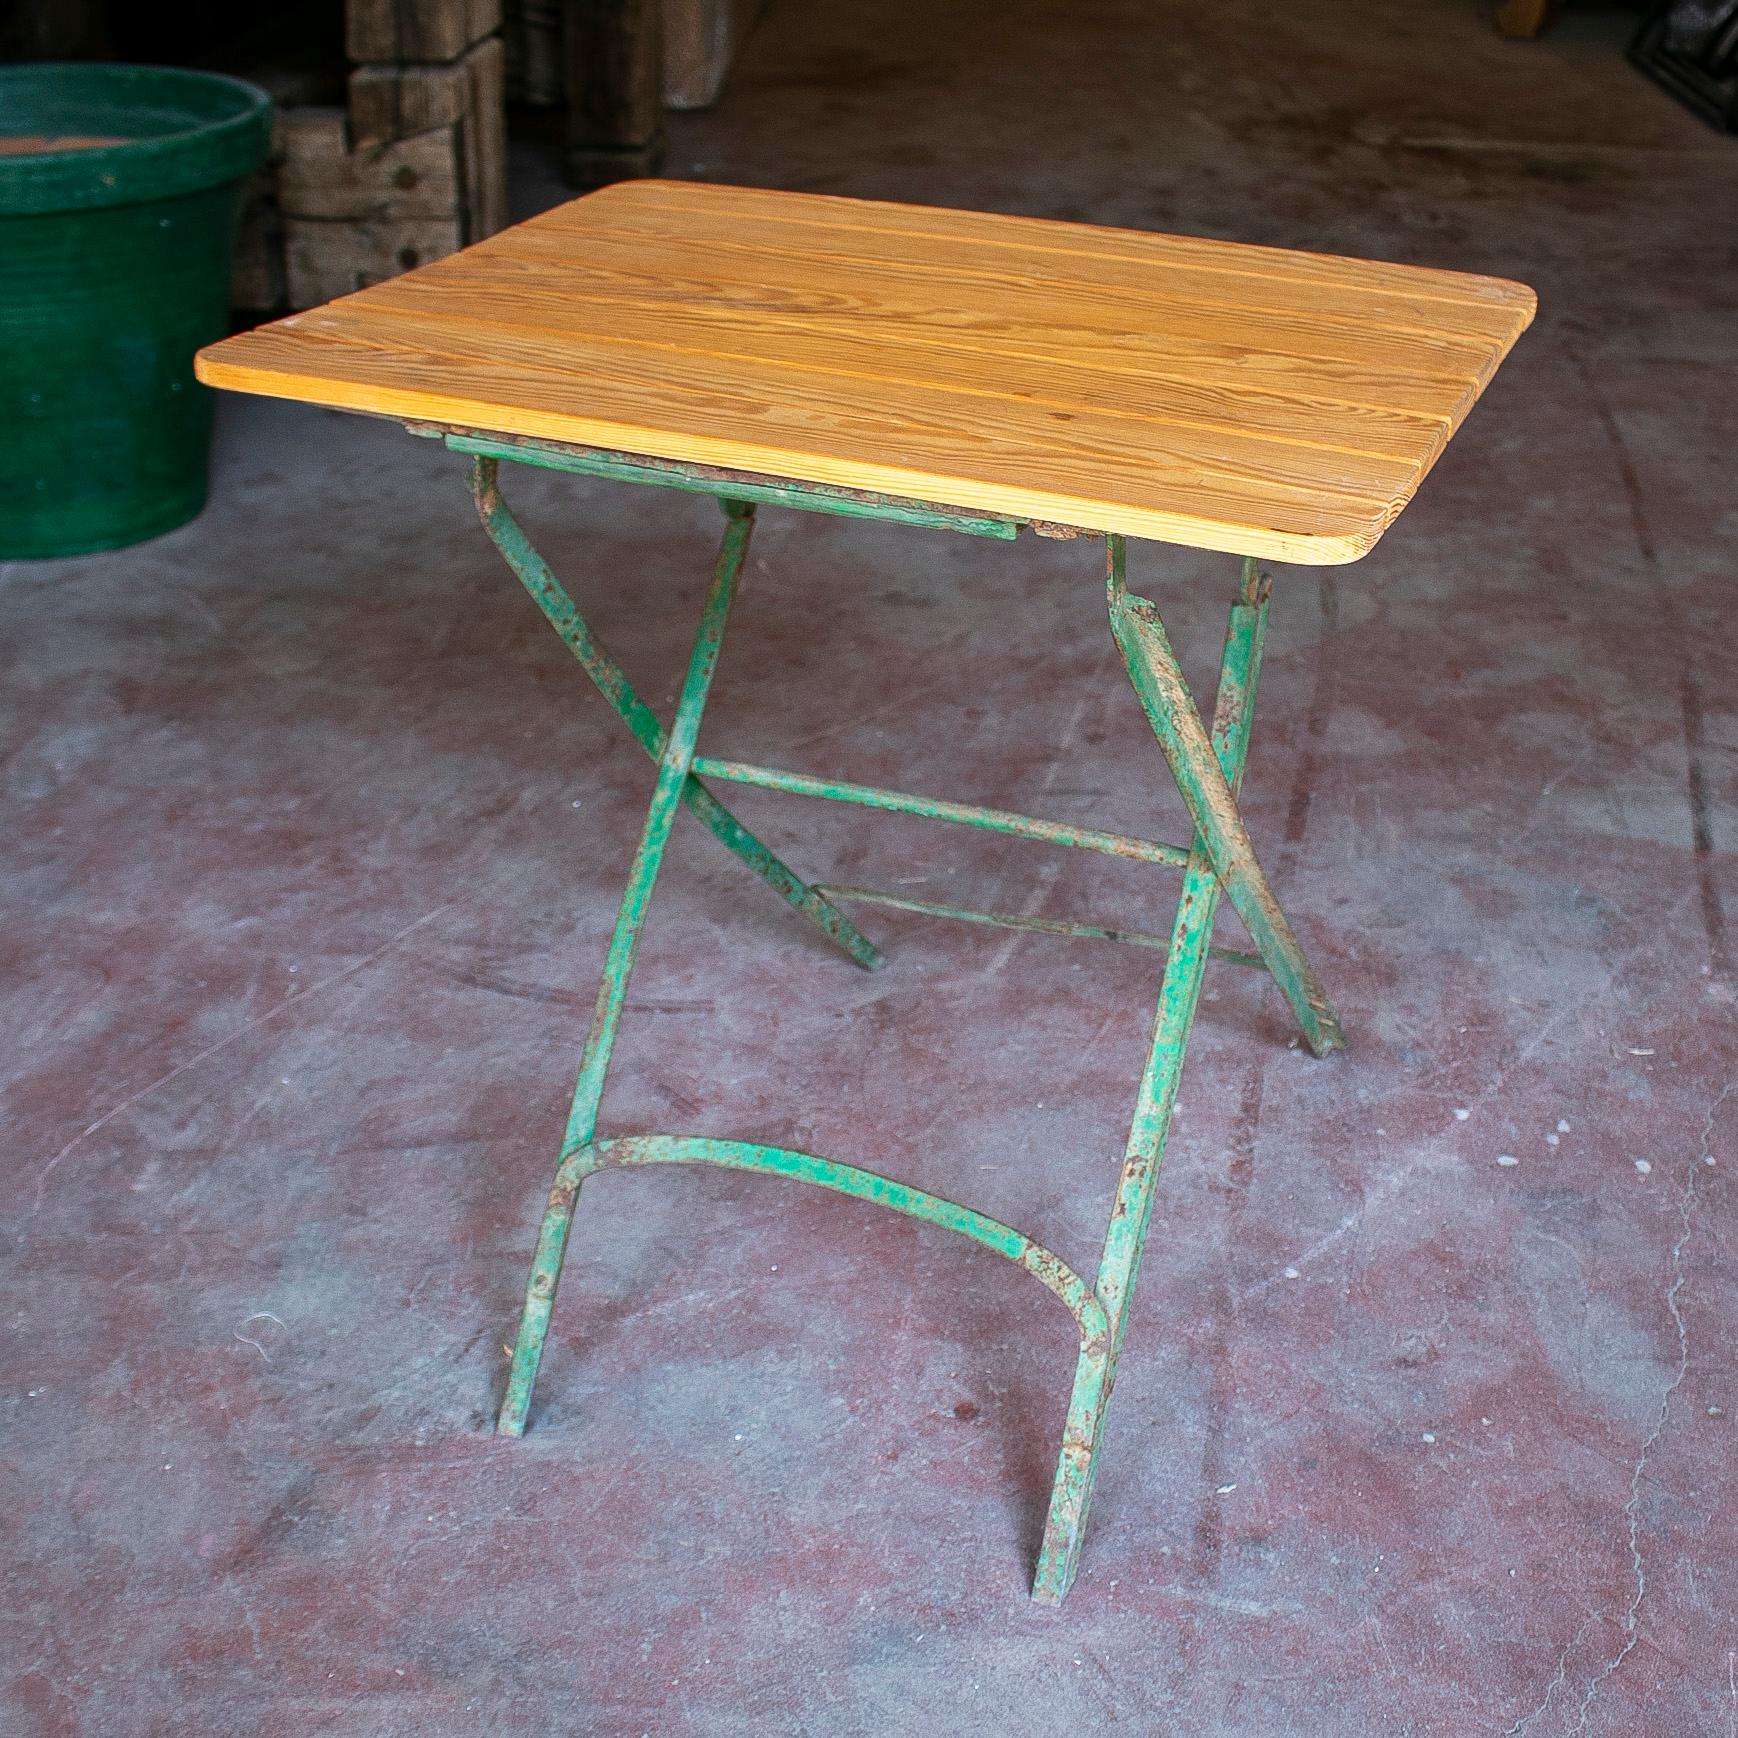 Vintage 1970s Spanish wooden garden table with iron base.